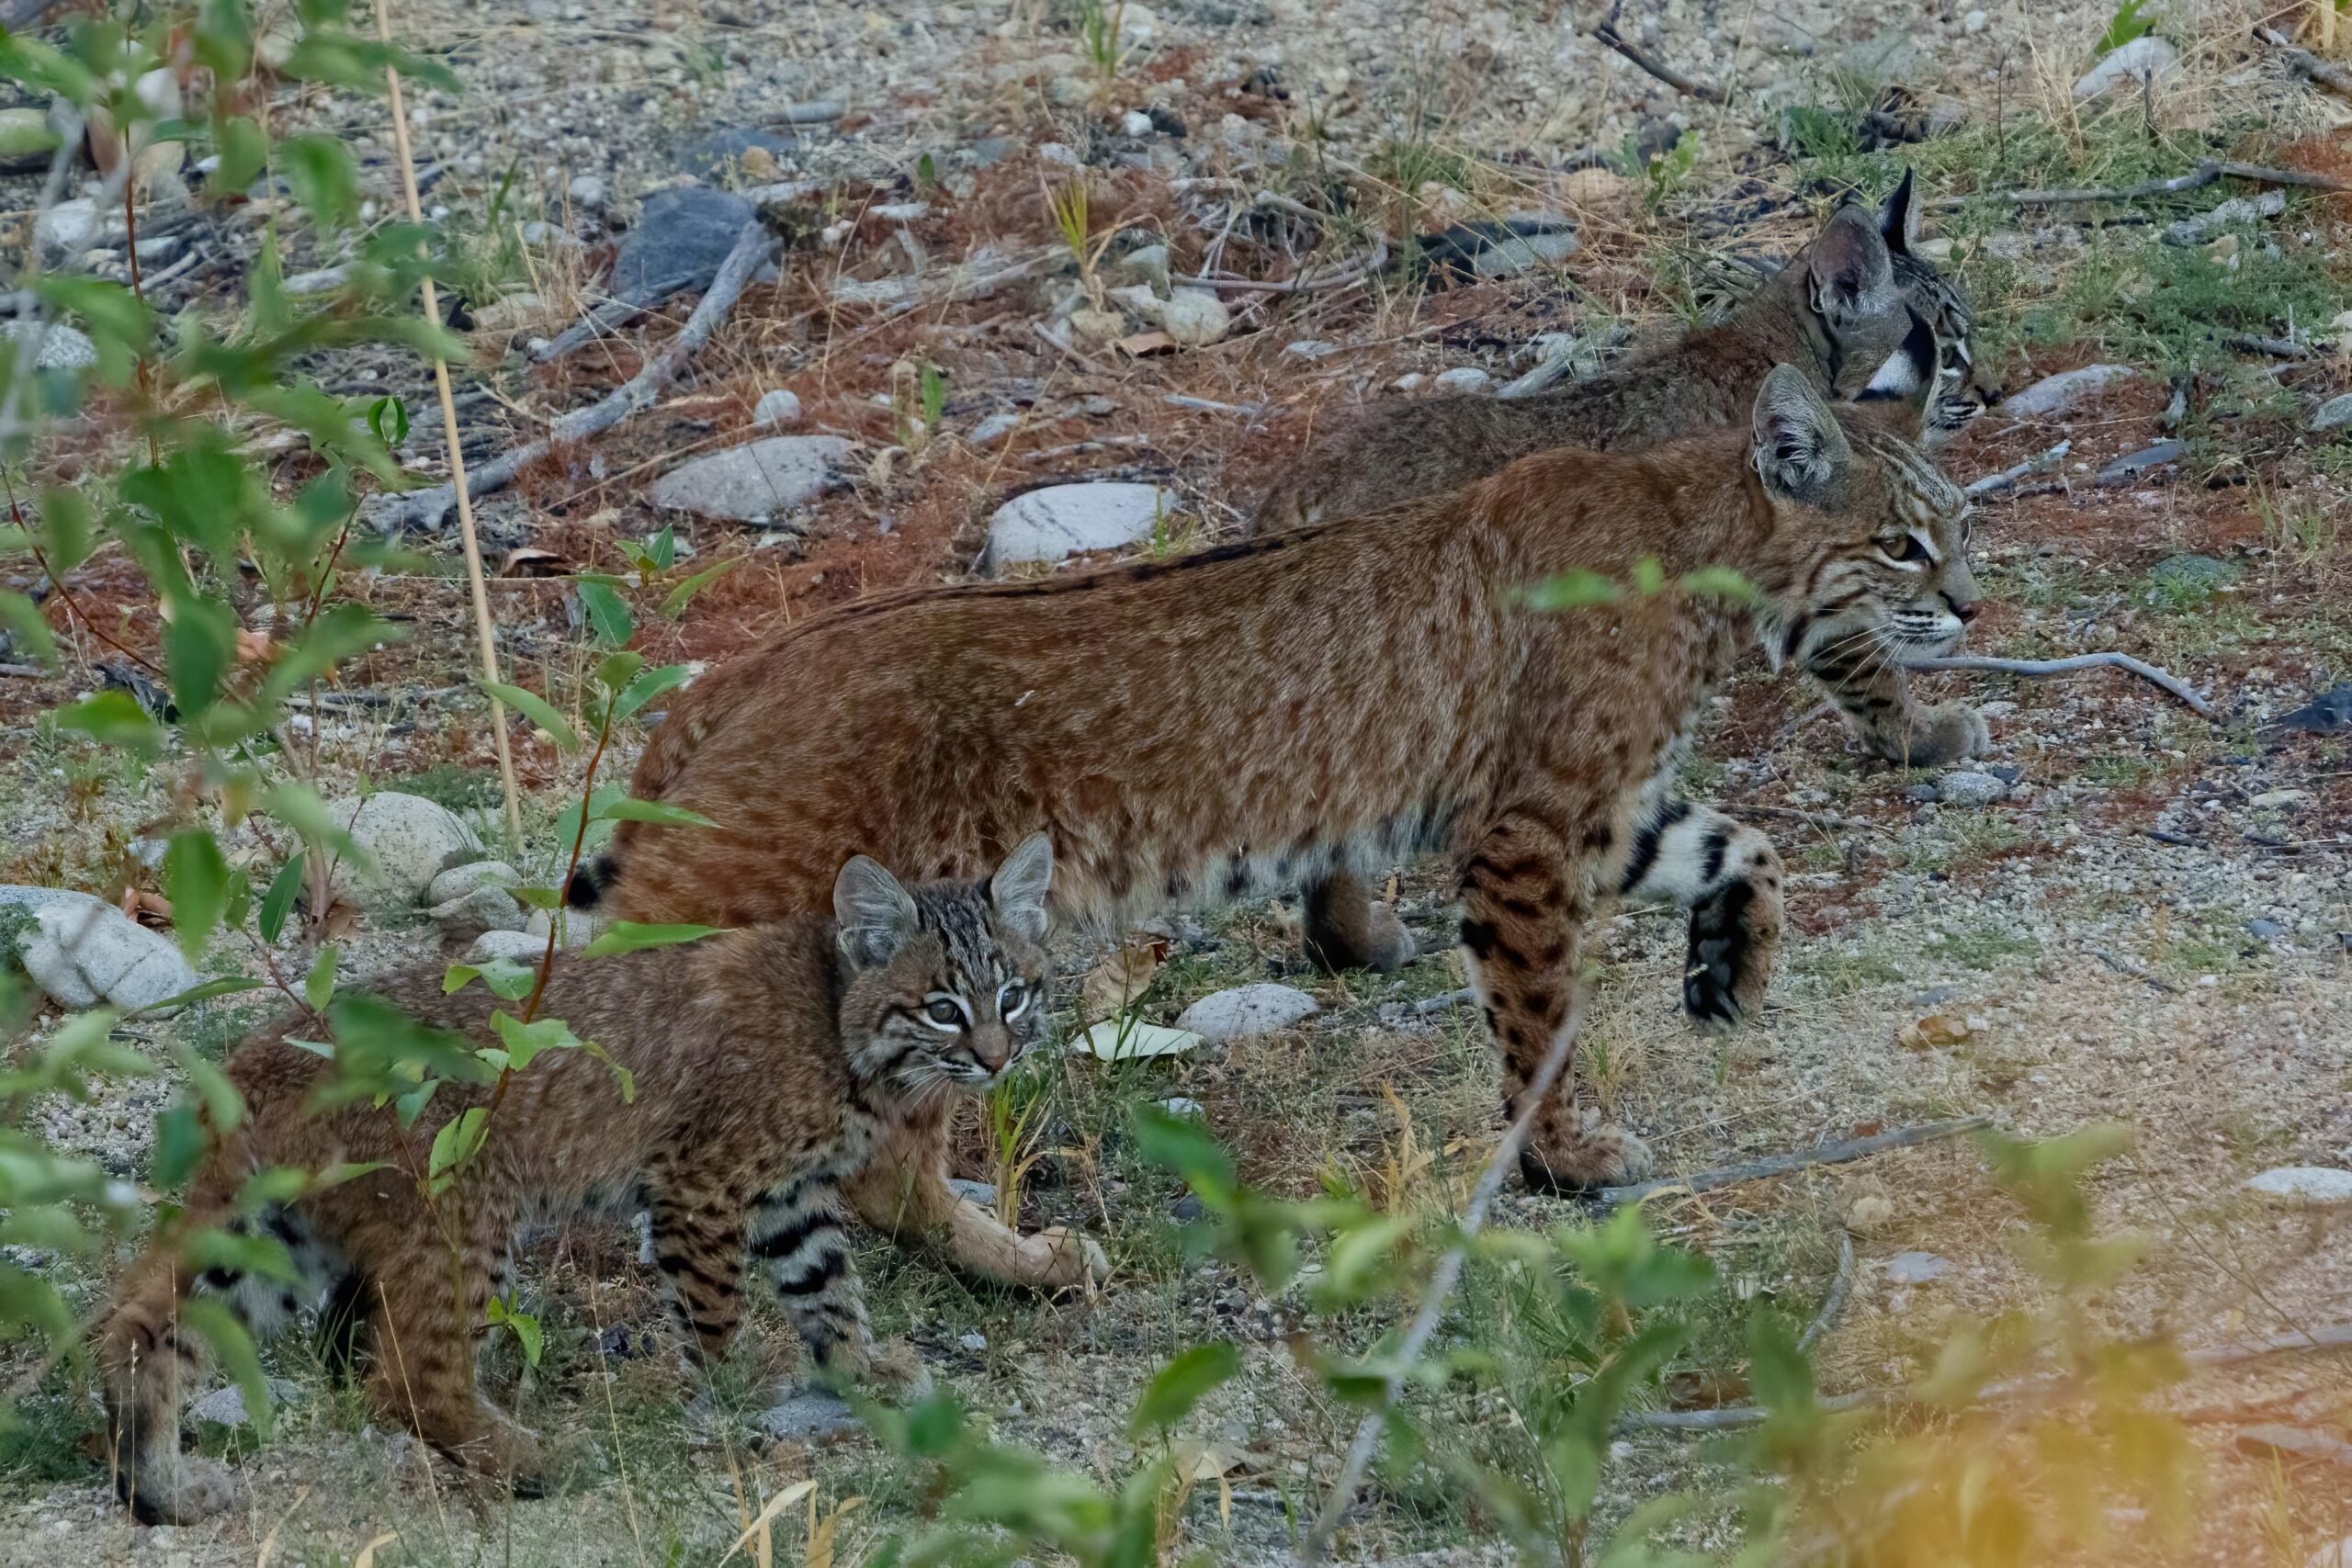 a mother bobcat walking along a gravely grassy area with two of her kittens. One of the kittens is looking in the direction of the camera, showing off its adorable face. The mother cat has a peaceful and majestic expression on her face as she looks forward.